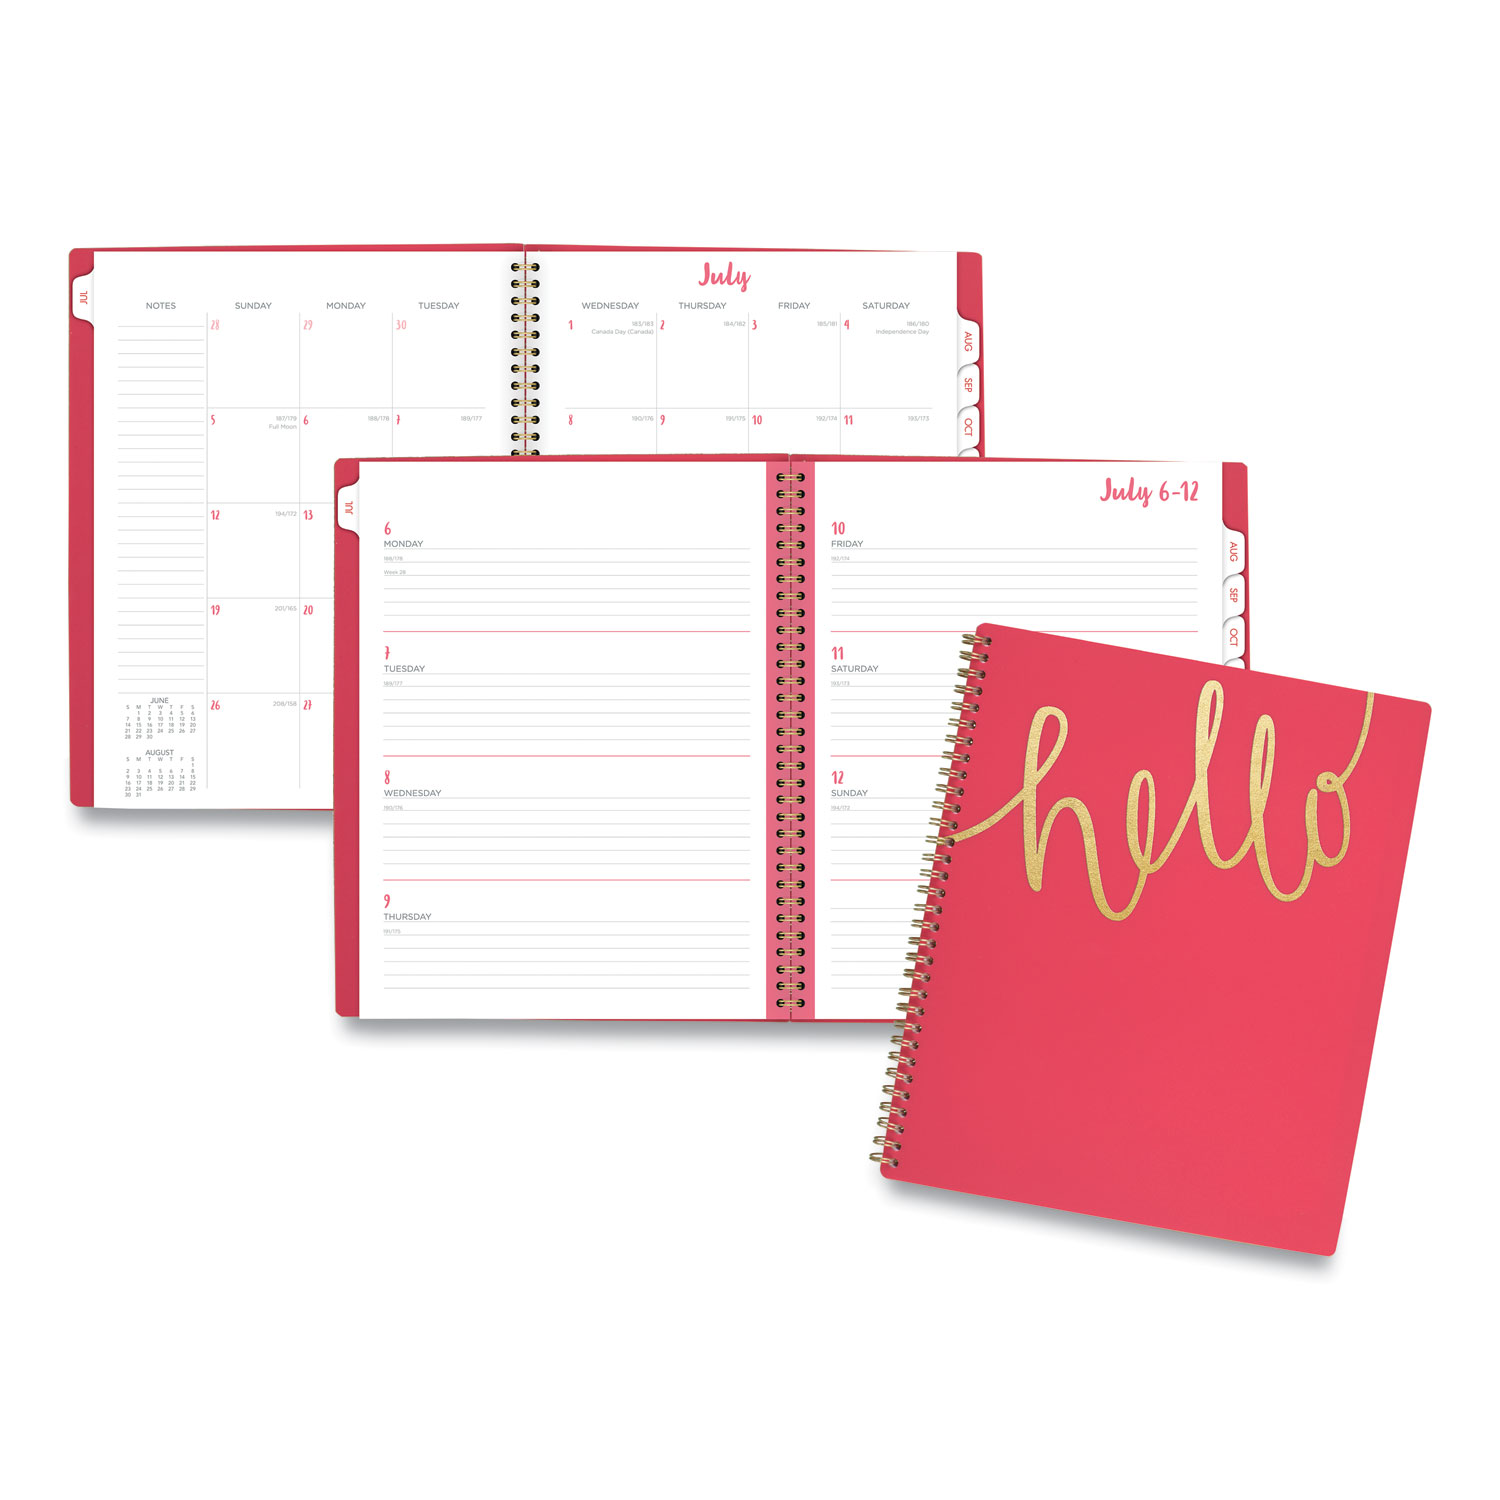  Cambridge 102290527 Aspire Weekly/Monthly Planner, 11 x 8 1/2, Coral, 2020 (AAG102290527) 